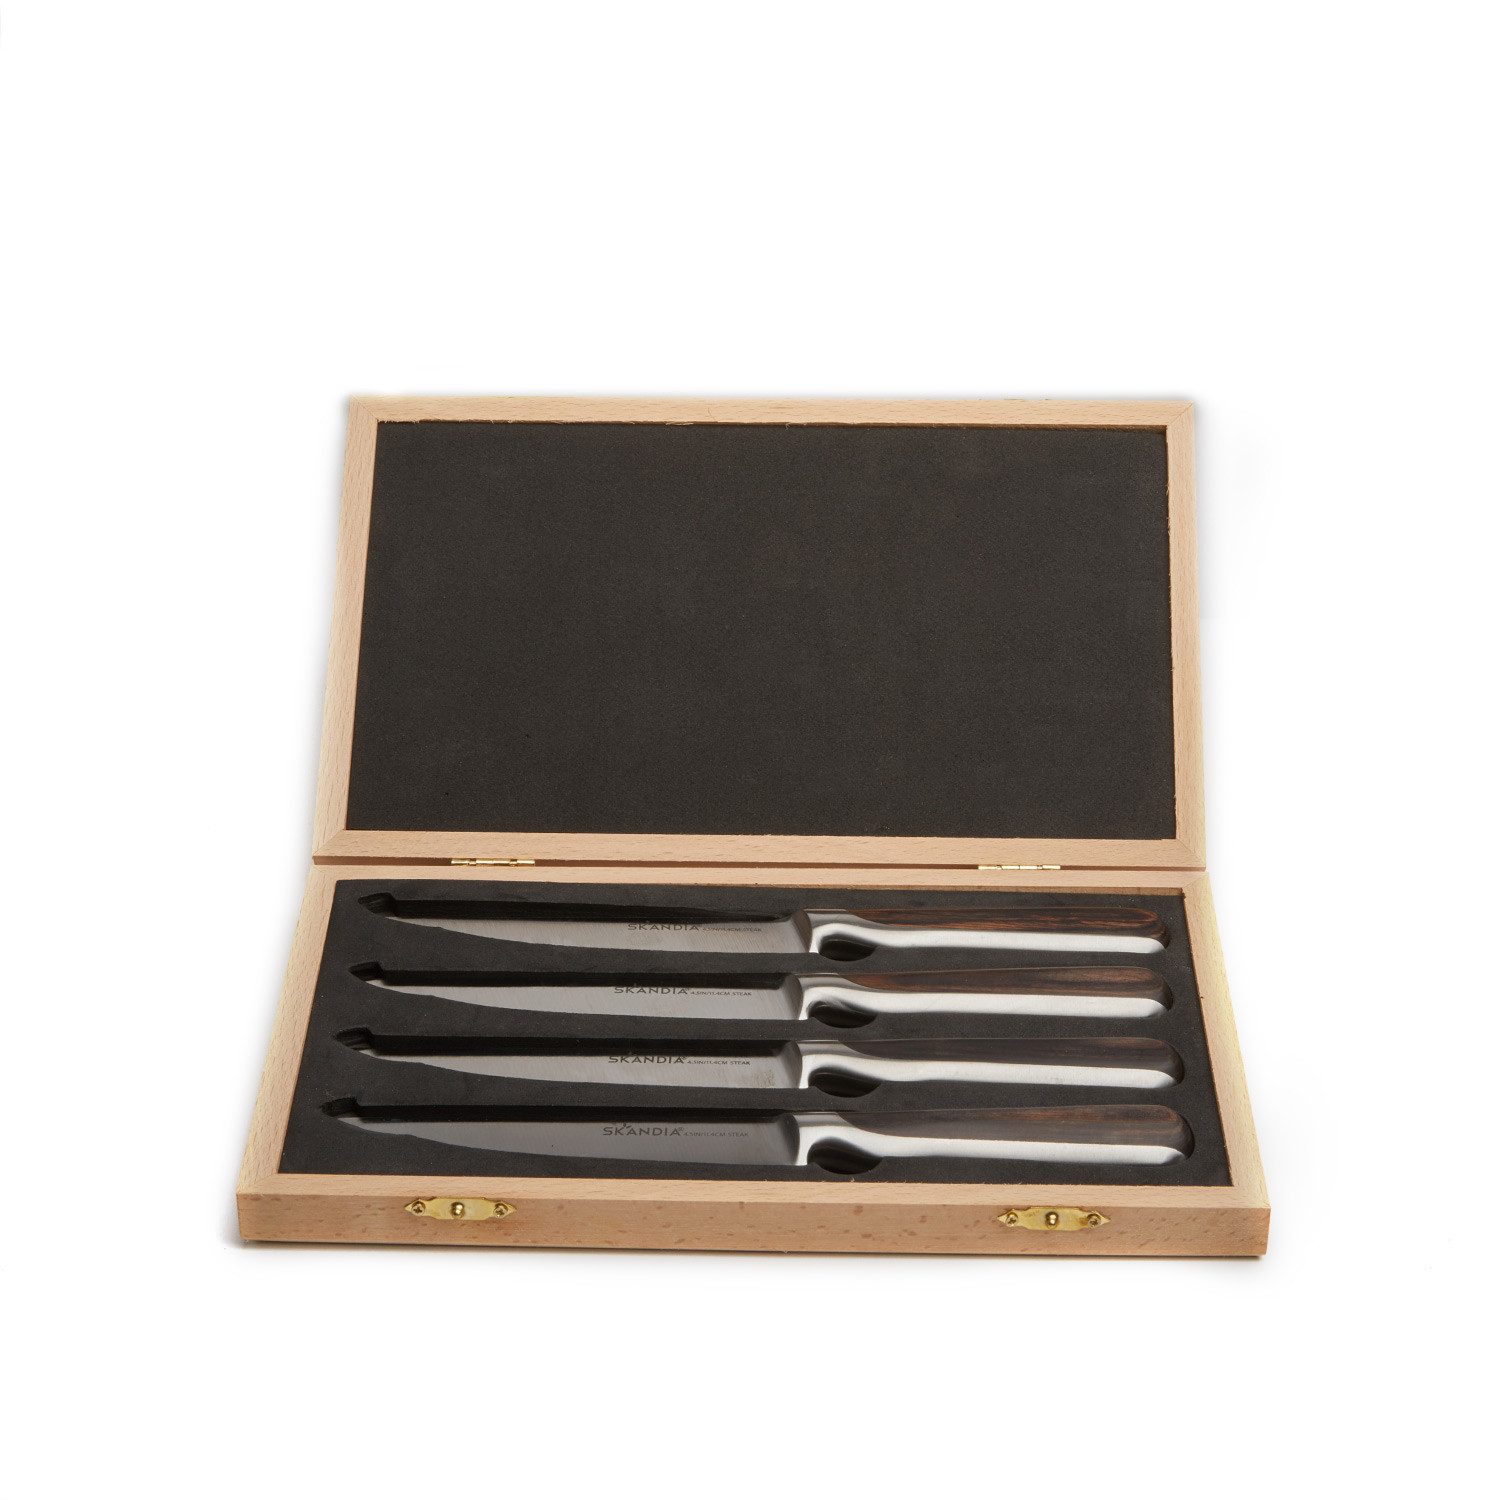 Skandia by Hampton Forge 6 Piece Cutlery Set with Blade Guards